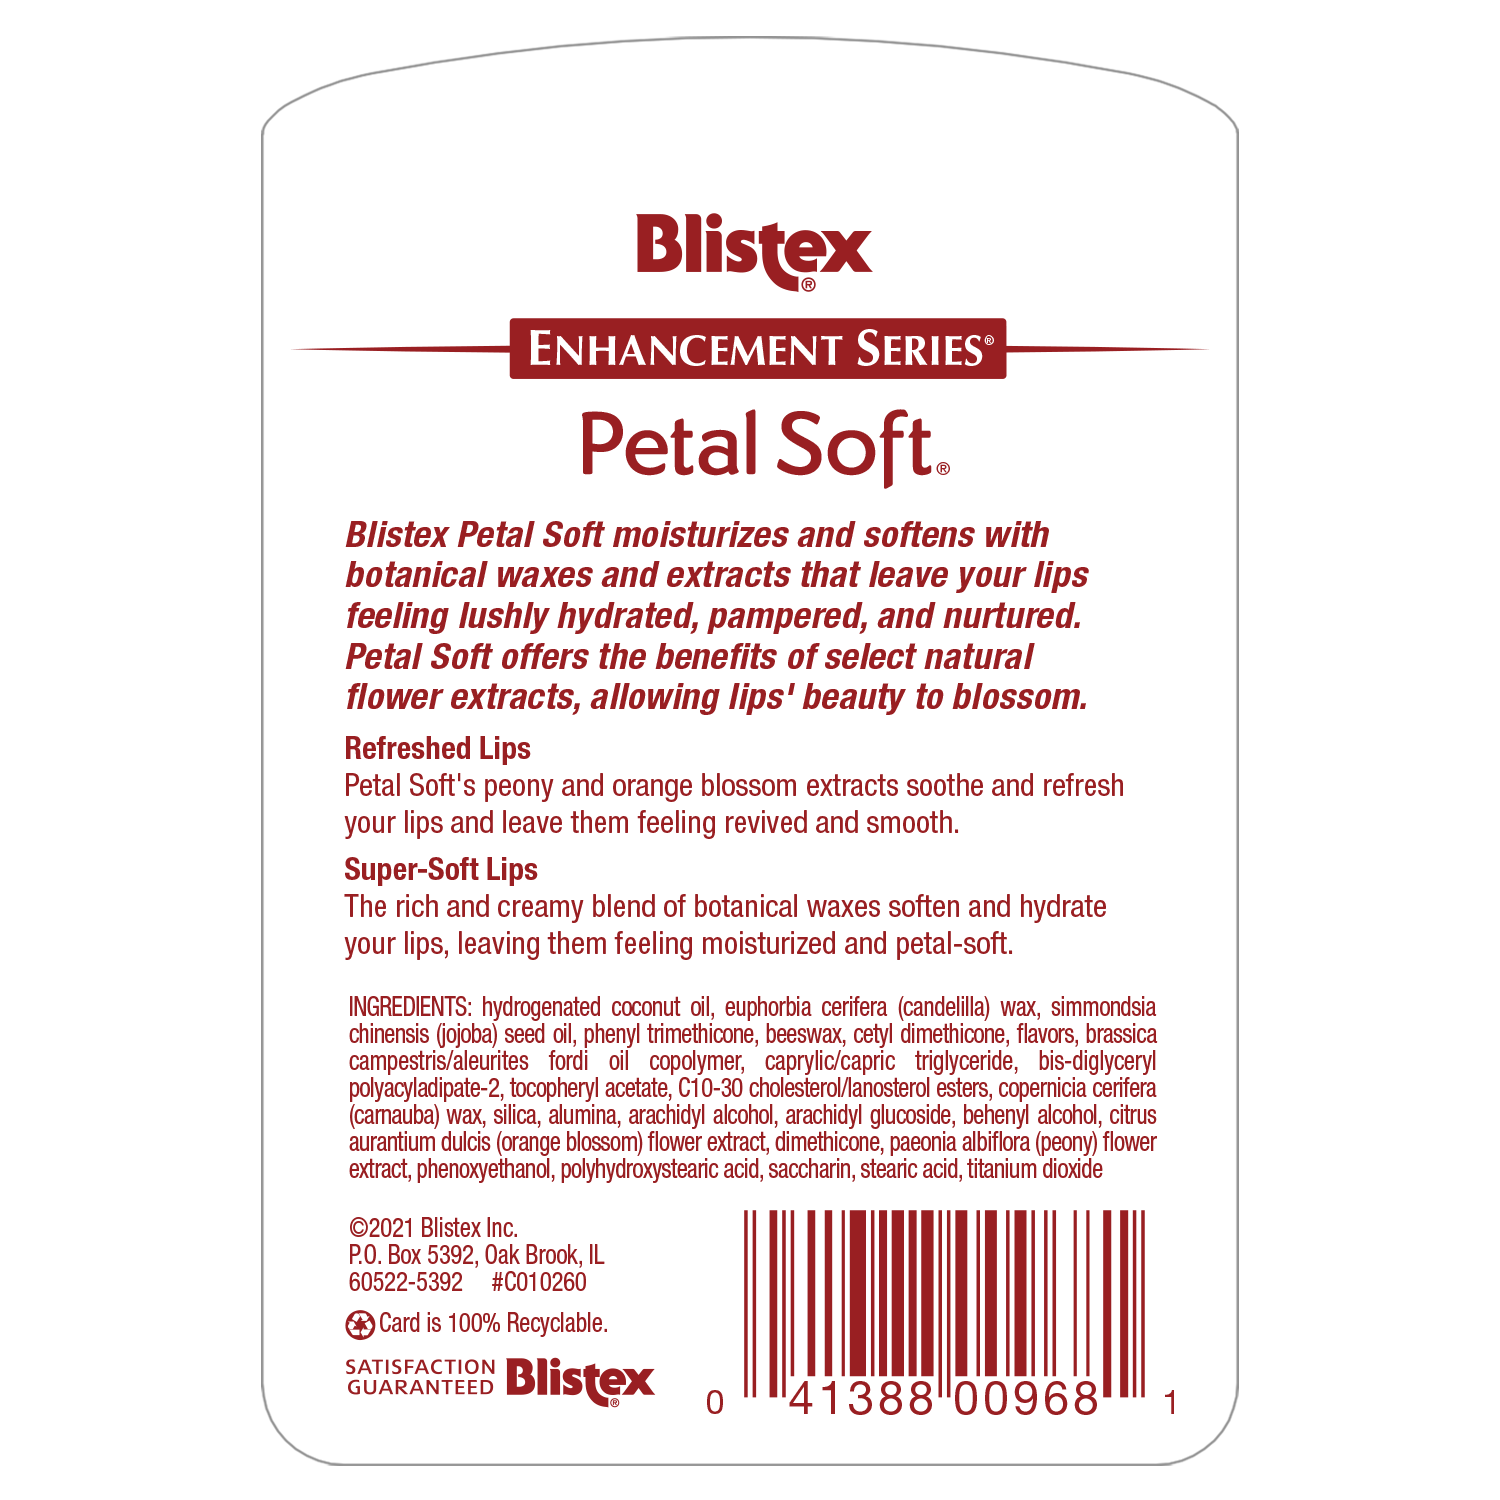 Blistex Petal Soft Lip Balm with Natural Flower Extracts - image 2 of 4